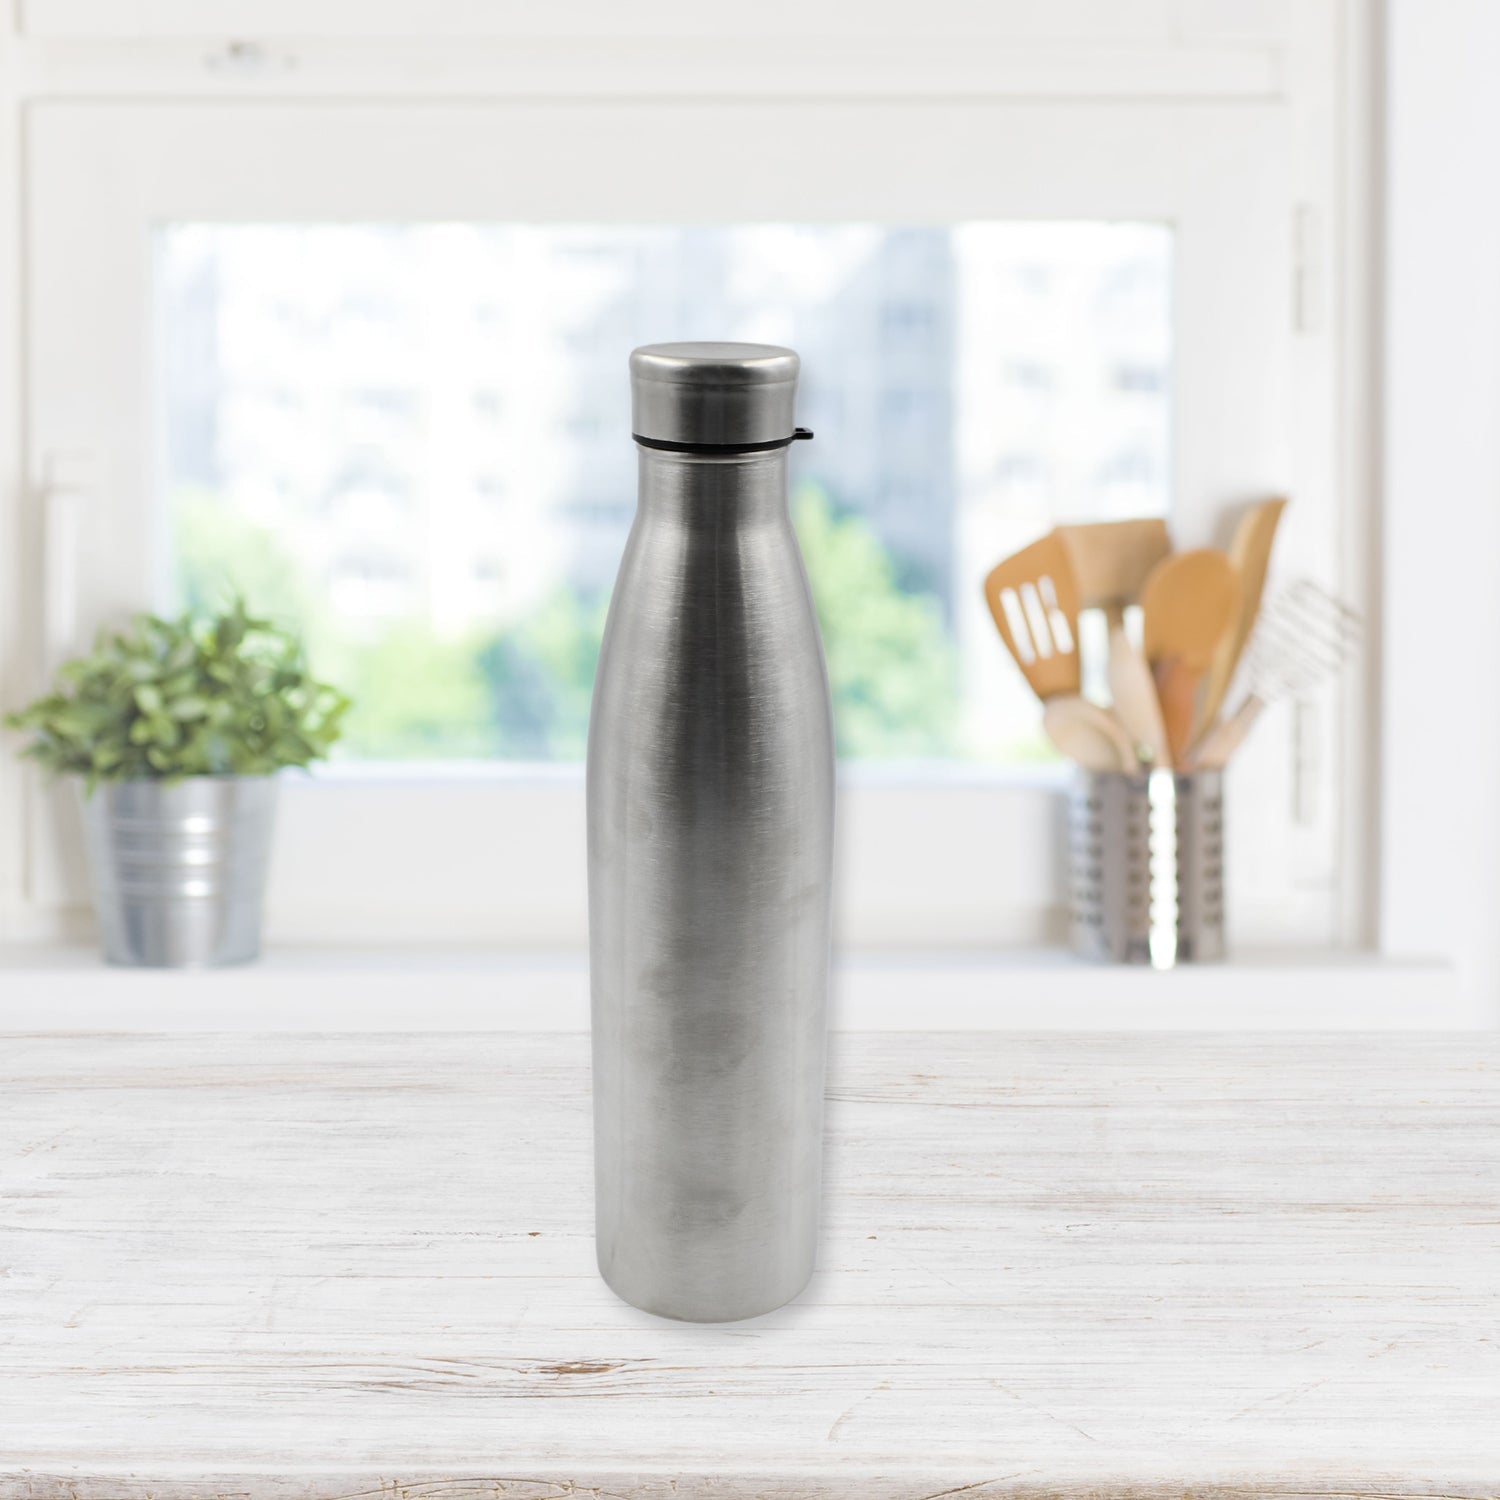 6857  Water Bottle for Office, Thermal Flask, Stainless Steel Water Bottles, Fridge Water Bottle, Hot & Cold Drinks, BPA Free, Leakproof, Portable For office/Gym/School 1000 ML